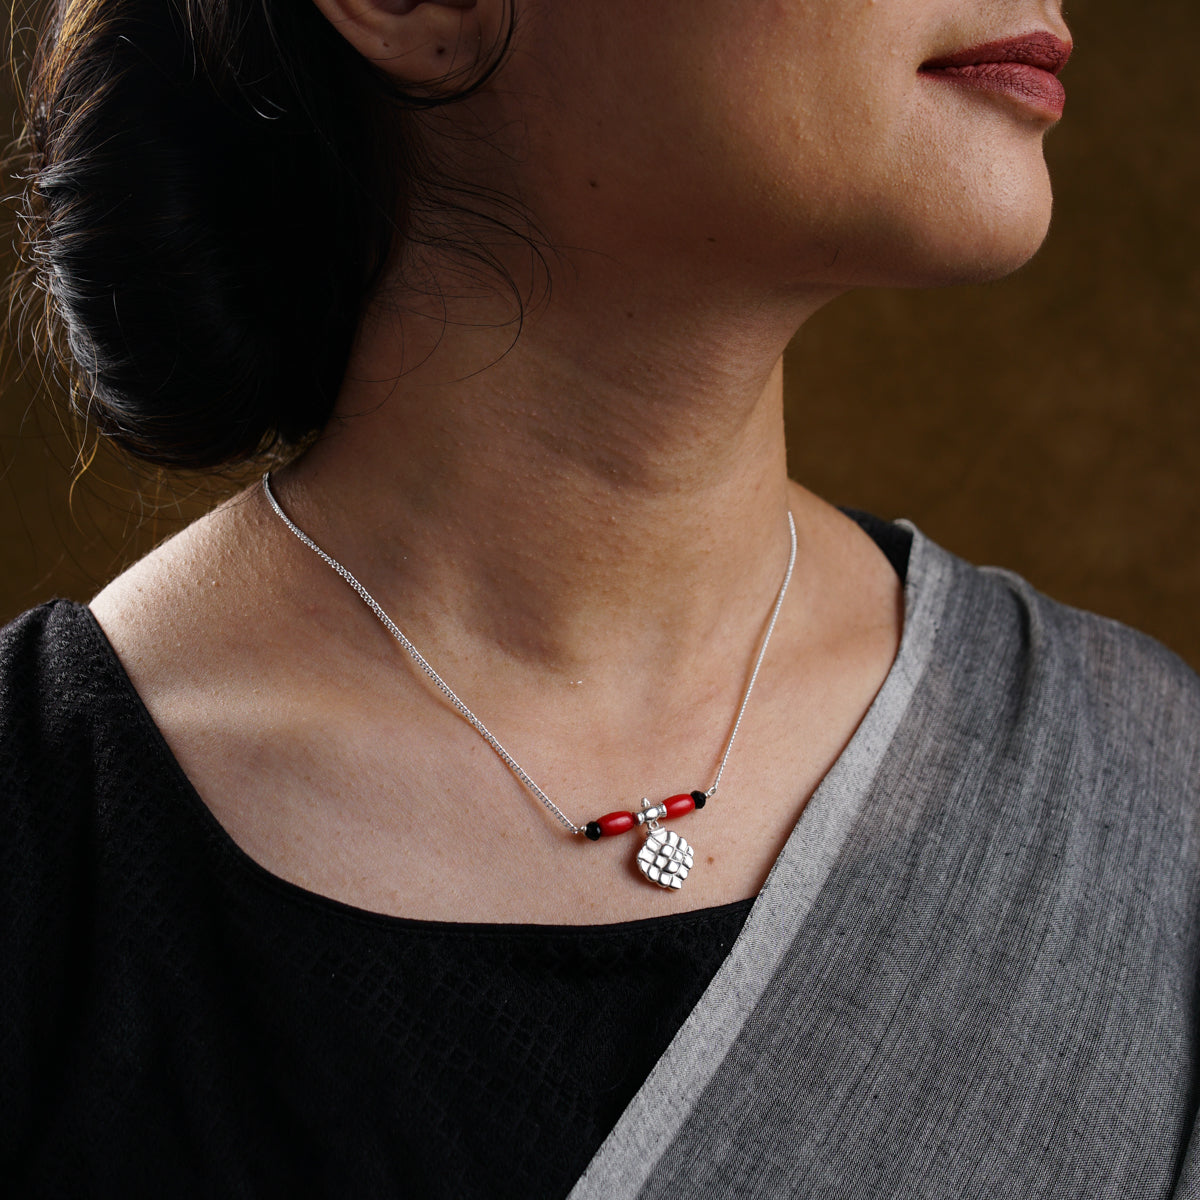 a woman wearing a red and white necklace